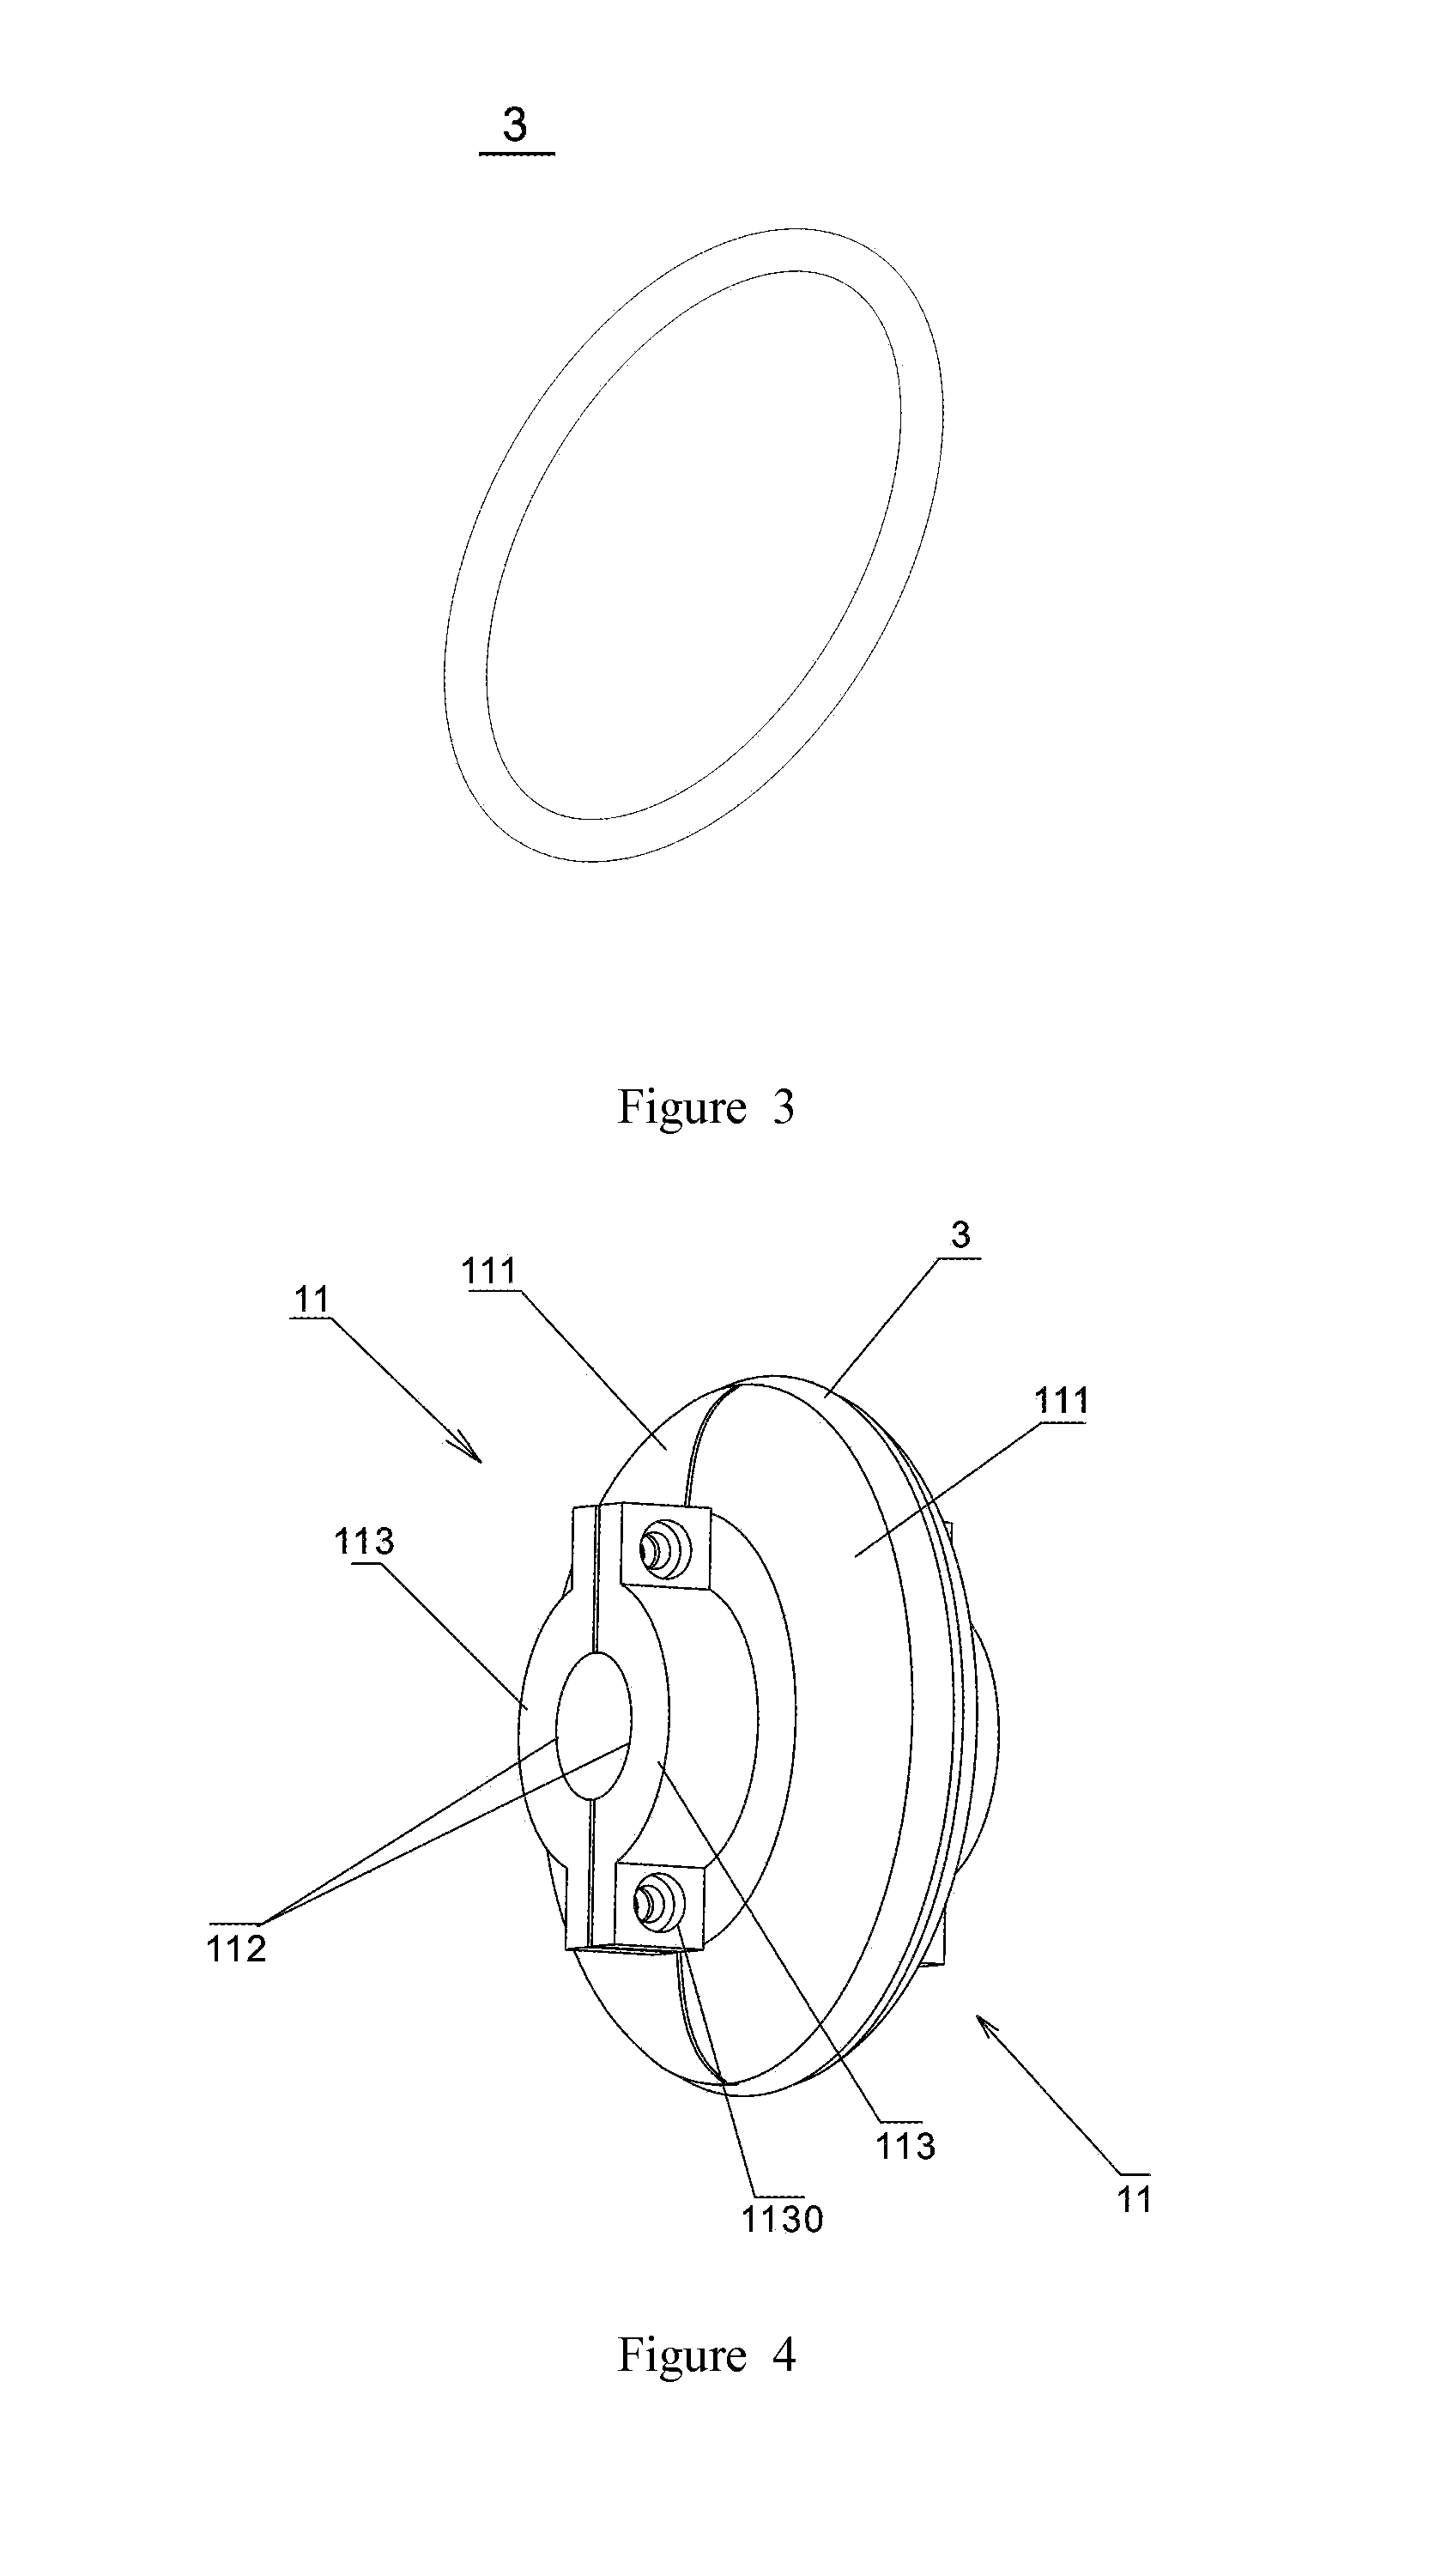 Roller for conveying glass substrate and roller axle assembly